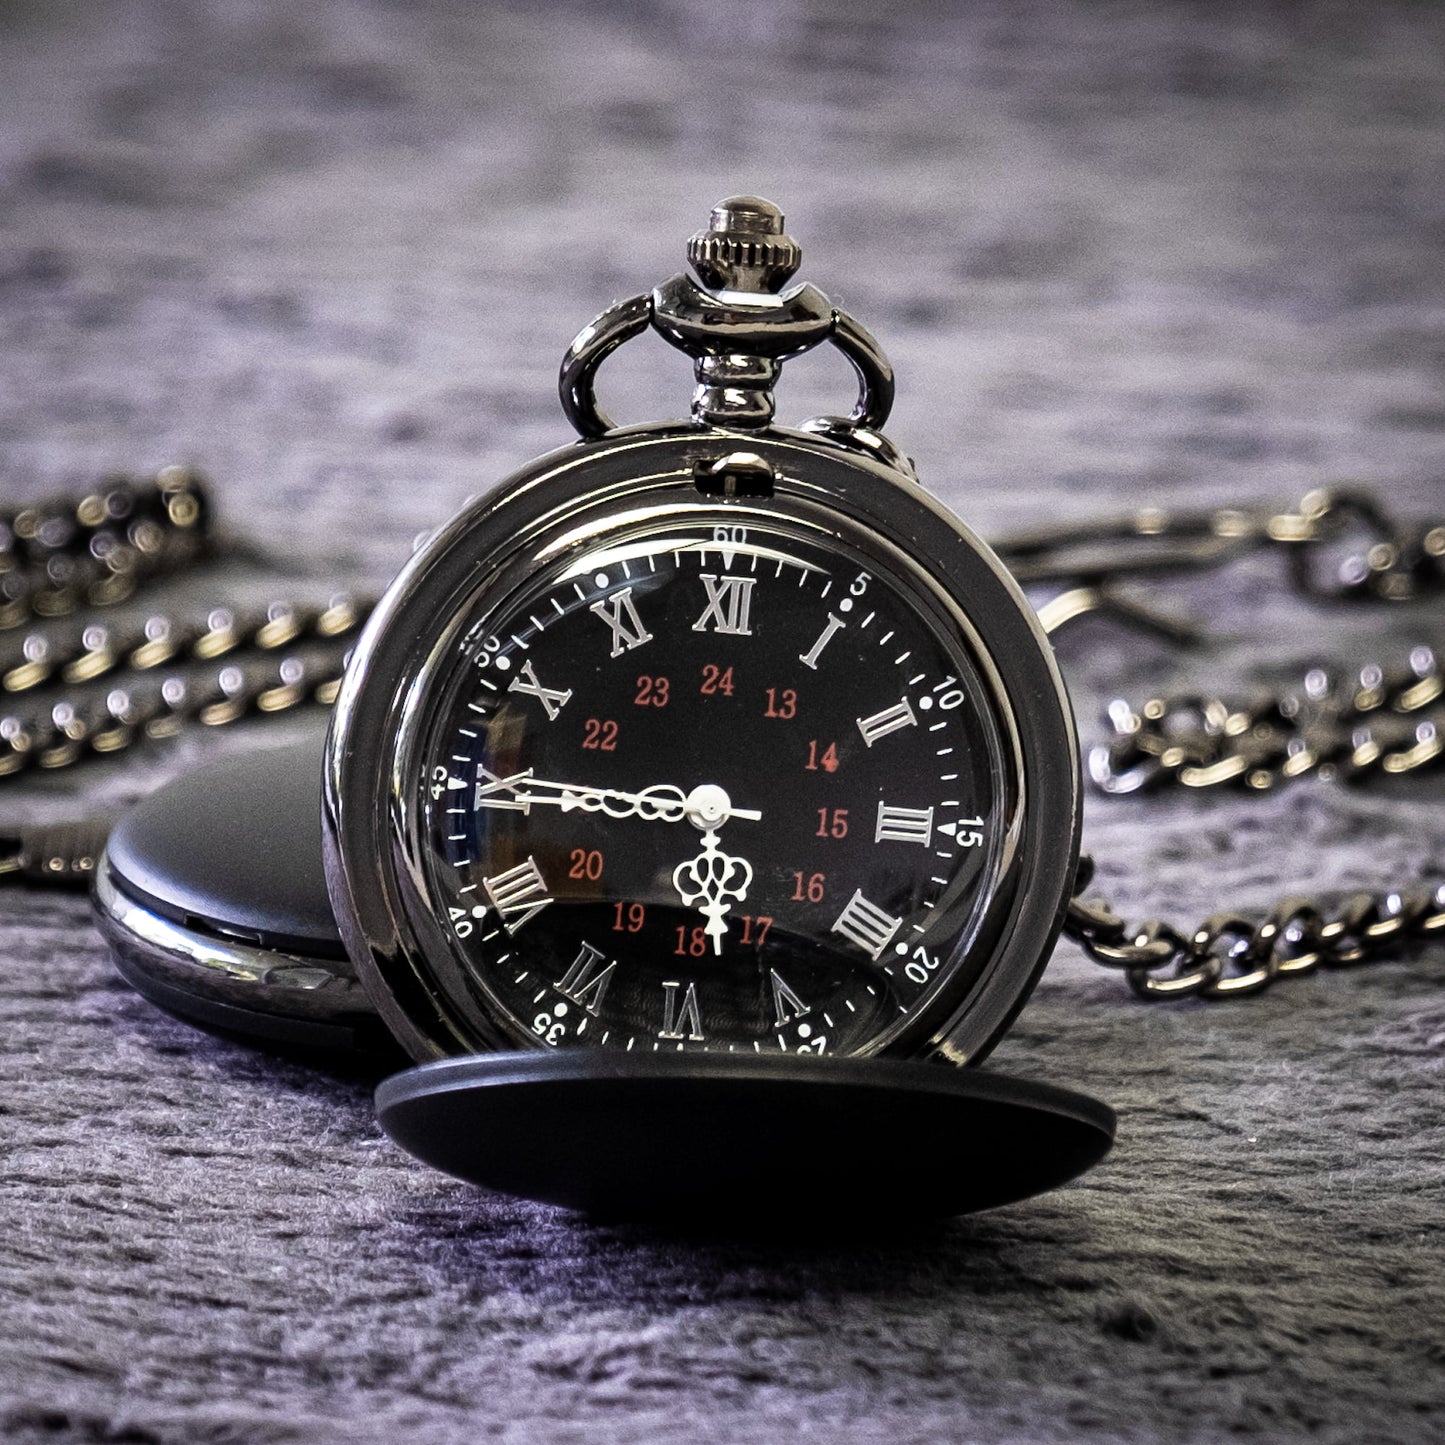 To My Grandson Pocket Watch from Grandpa, Gift for Grandson, Black Engraved Pocket Watch, If I Could Give You One Thing, Birthday, Christmas Gift.